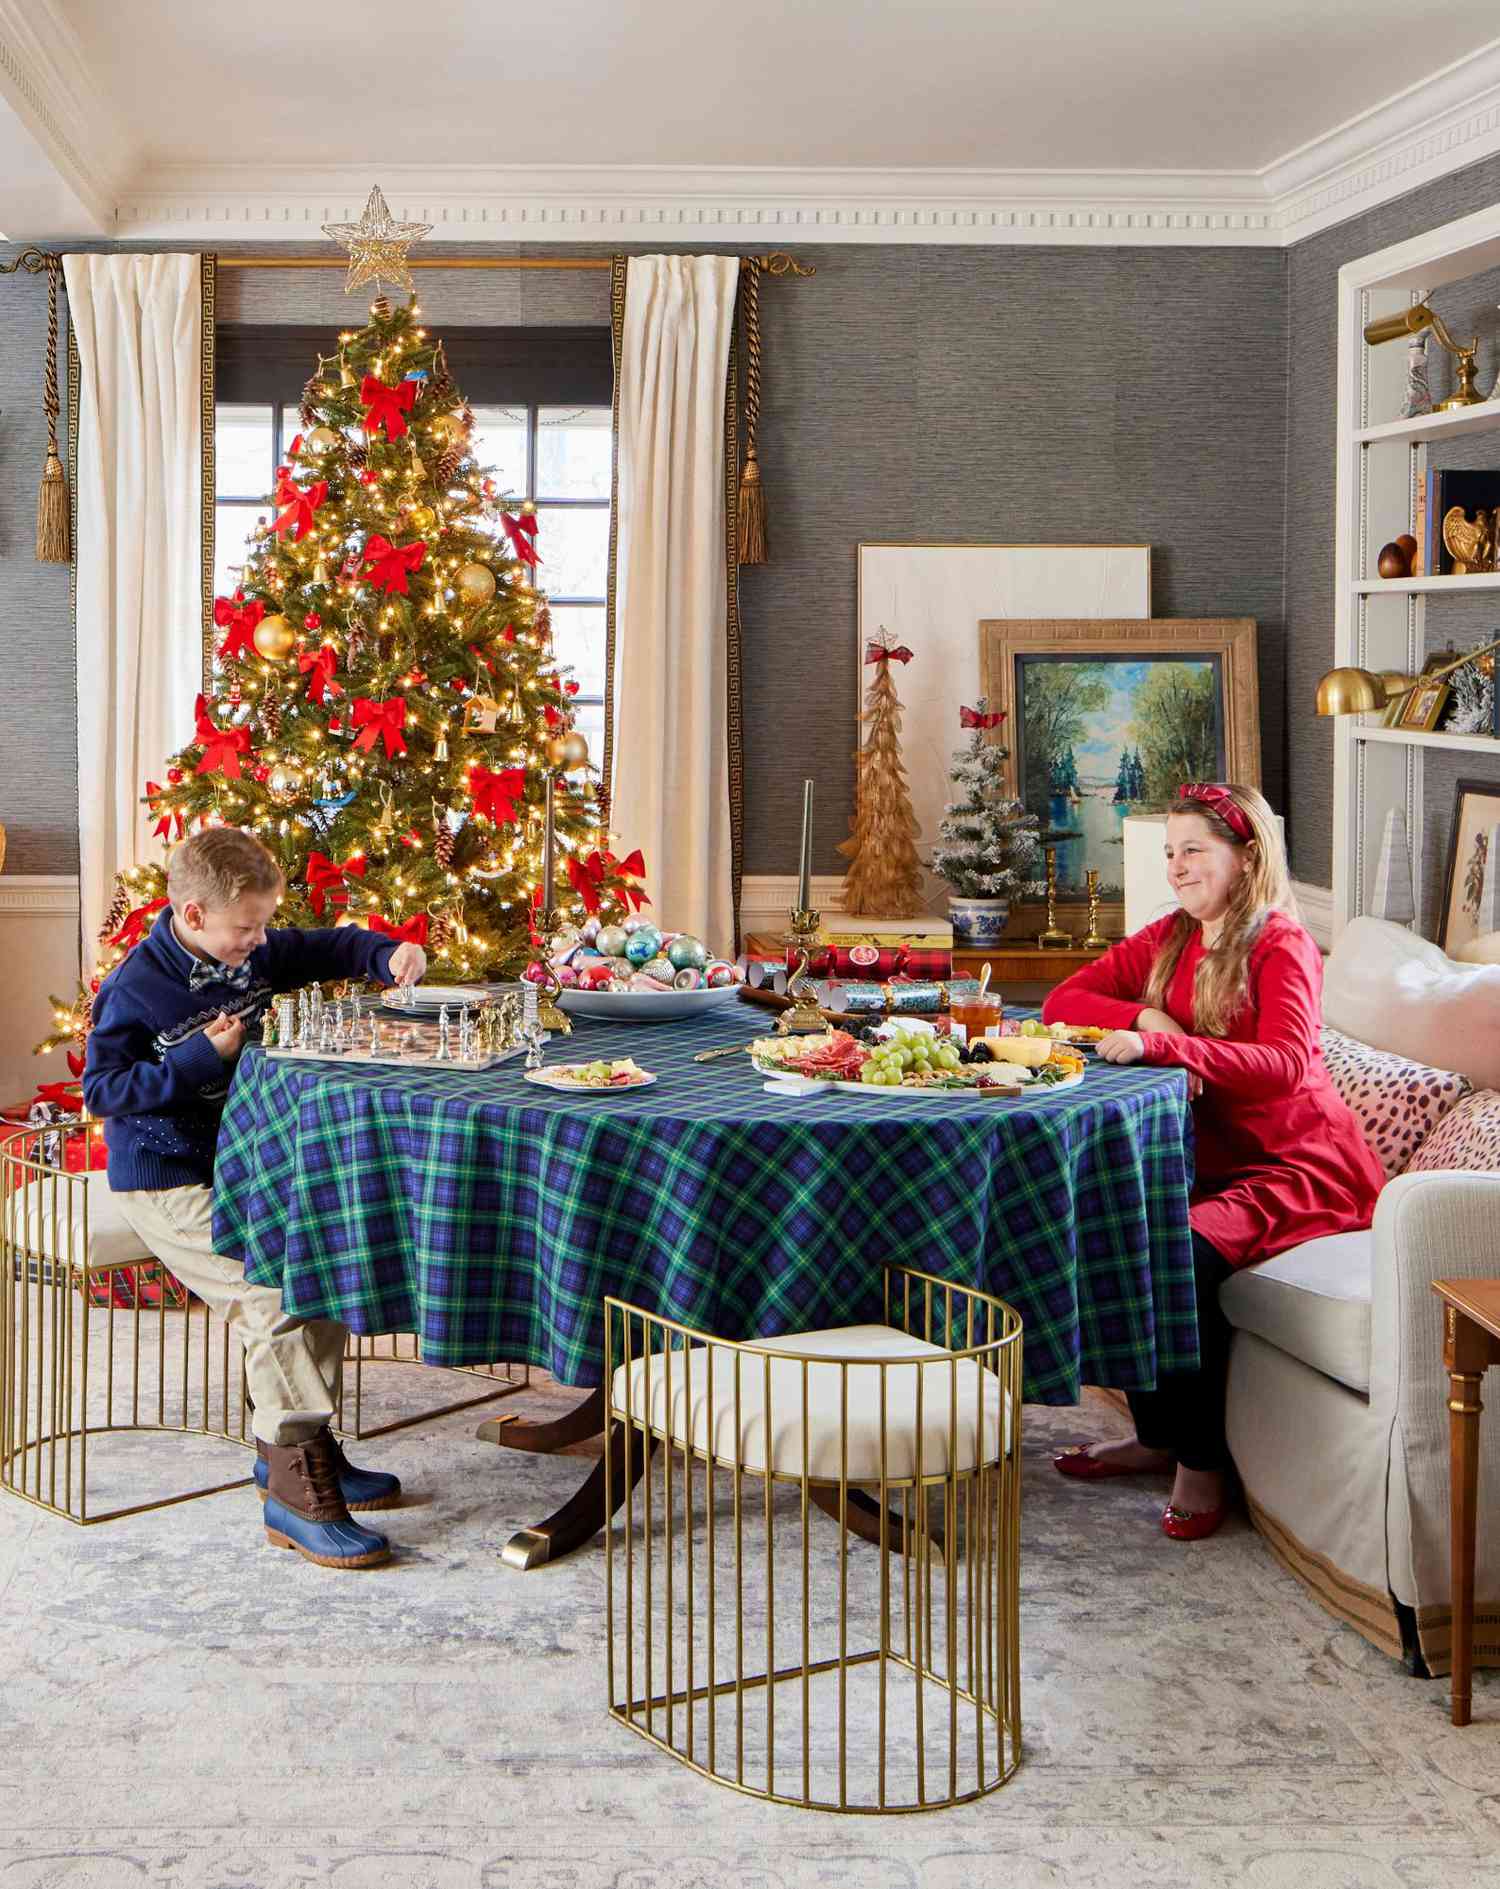 Children around a game table in front of a Christmas tree